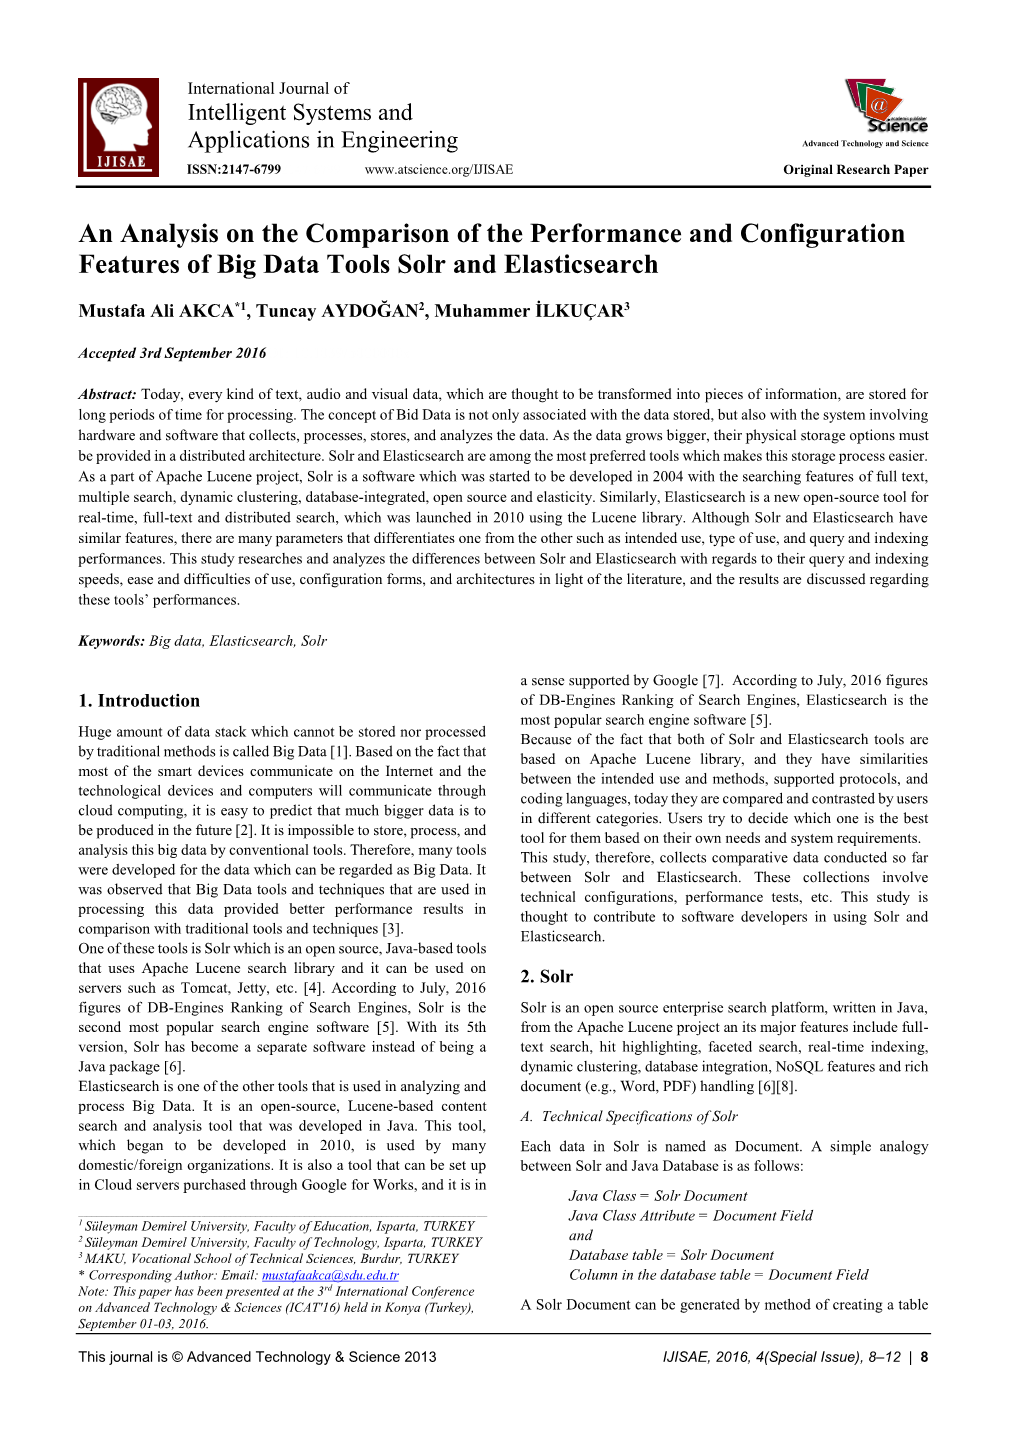 An Analysis on the Comparison of the Performance and Configuration Features of Big Data Tools Solr and Elasticsearch